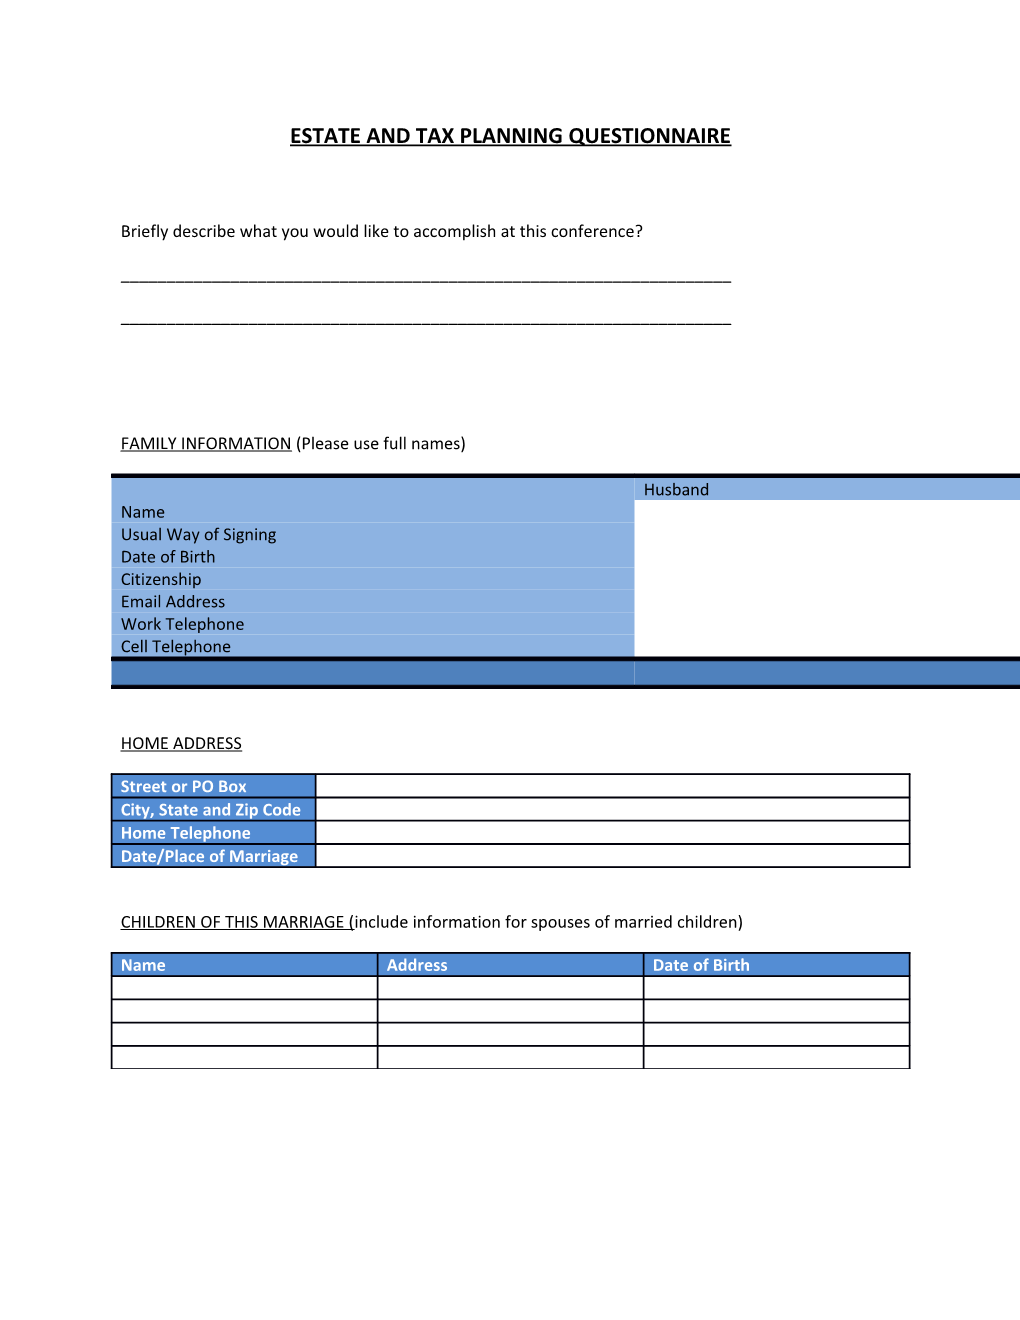 Estate and Tax Planning Questionnaire